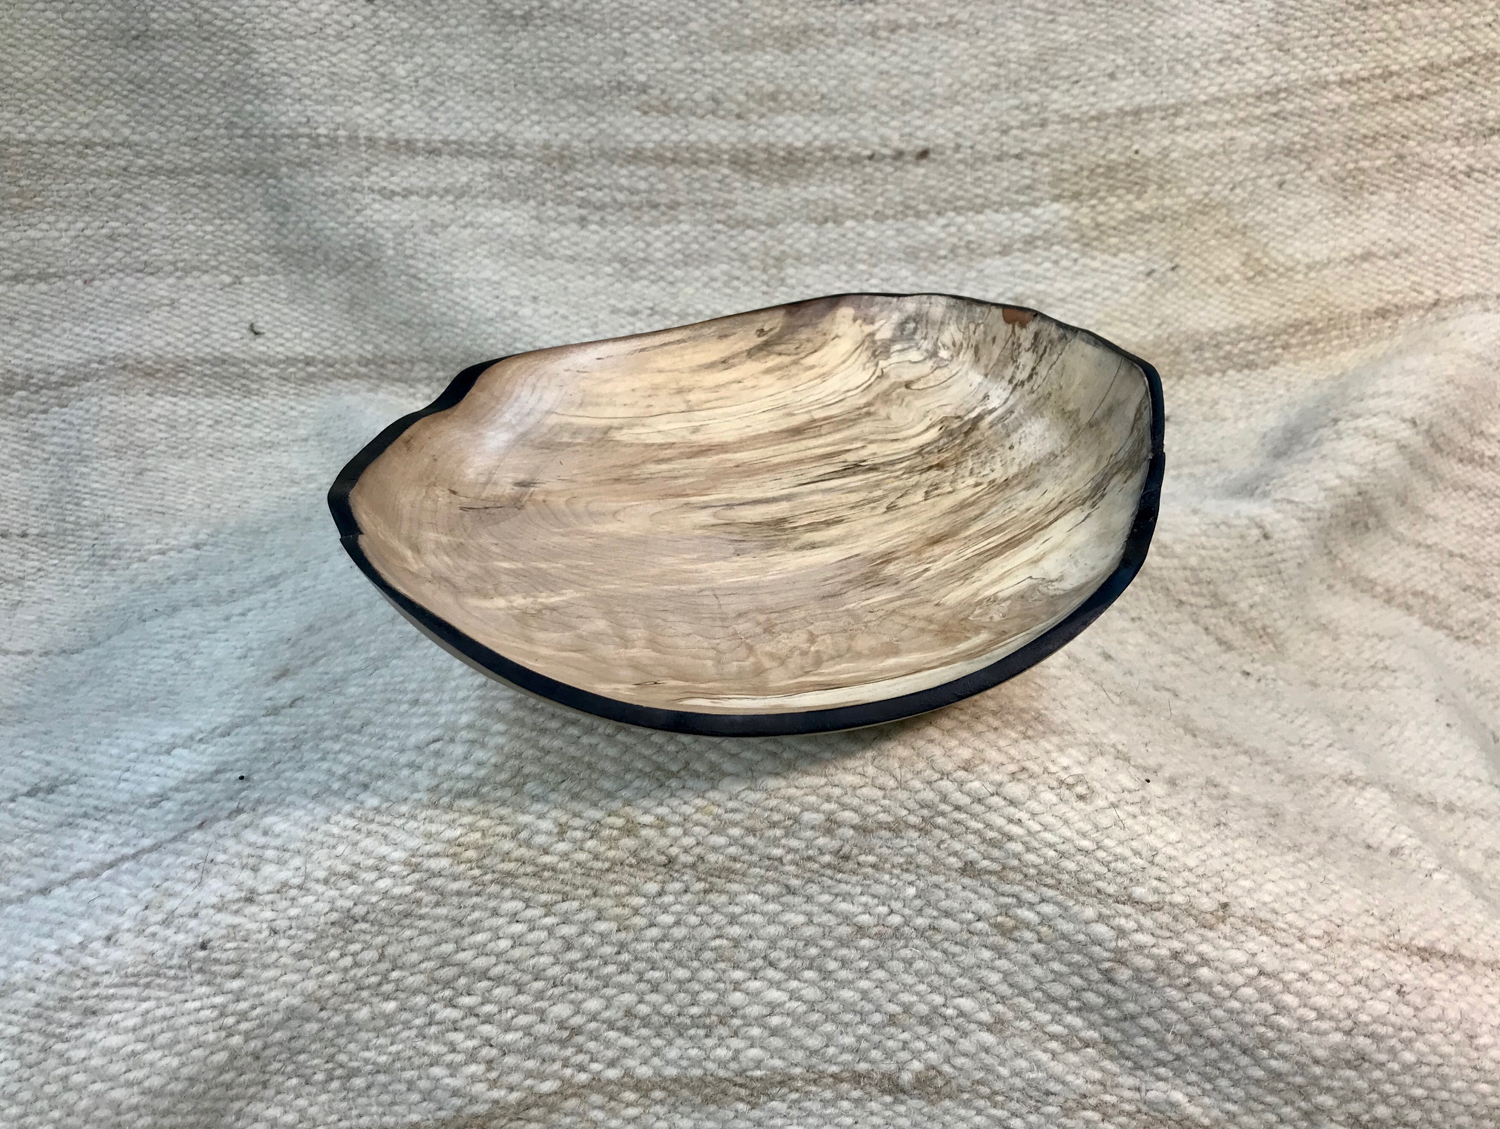 Maple, natural rim painted black, 10x9x3 inches by Sandy Renna